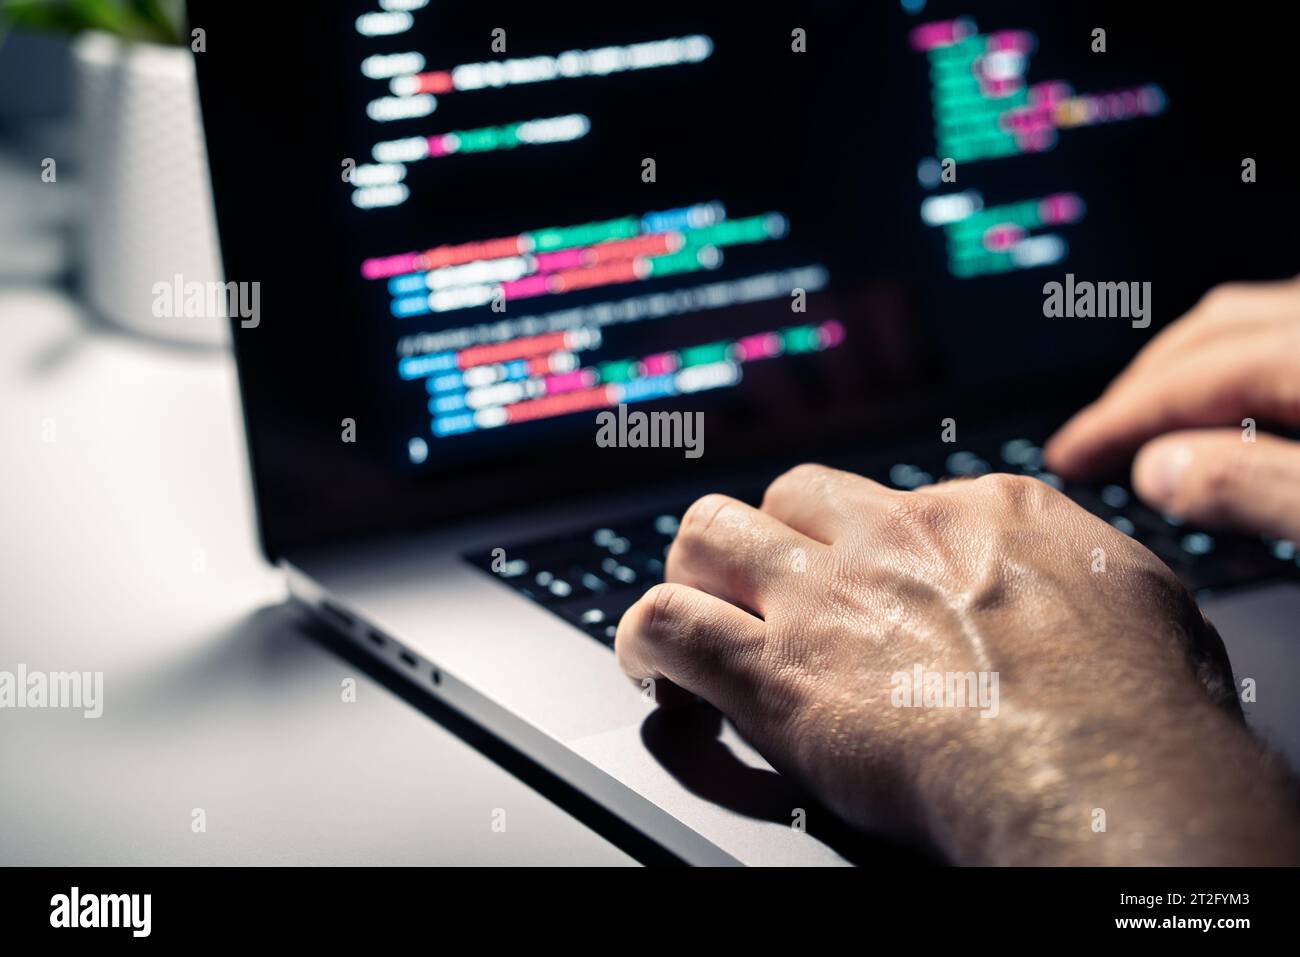 Hacker with malware code in computer screen. Cybersecurity, privacy or cyber attack. Programmer or fraud criminal writing virus software. Stock Photo